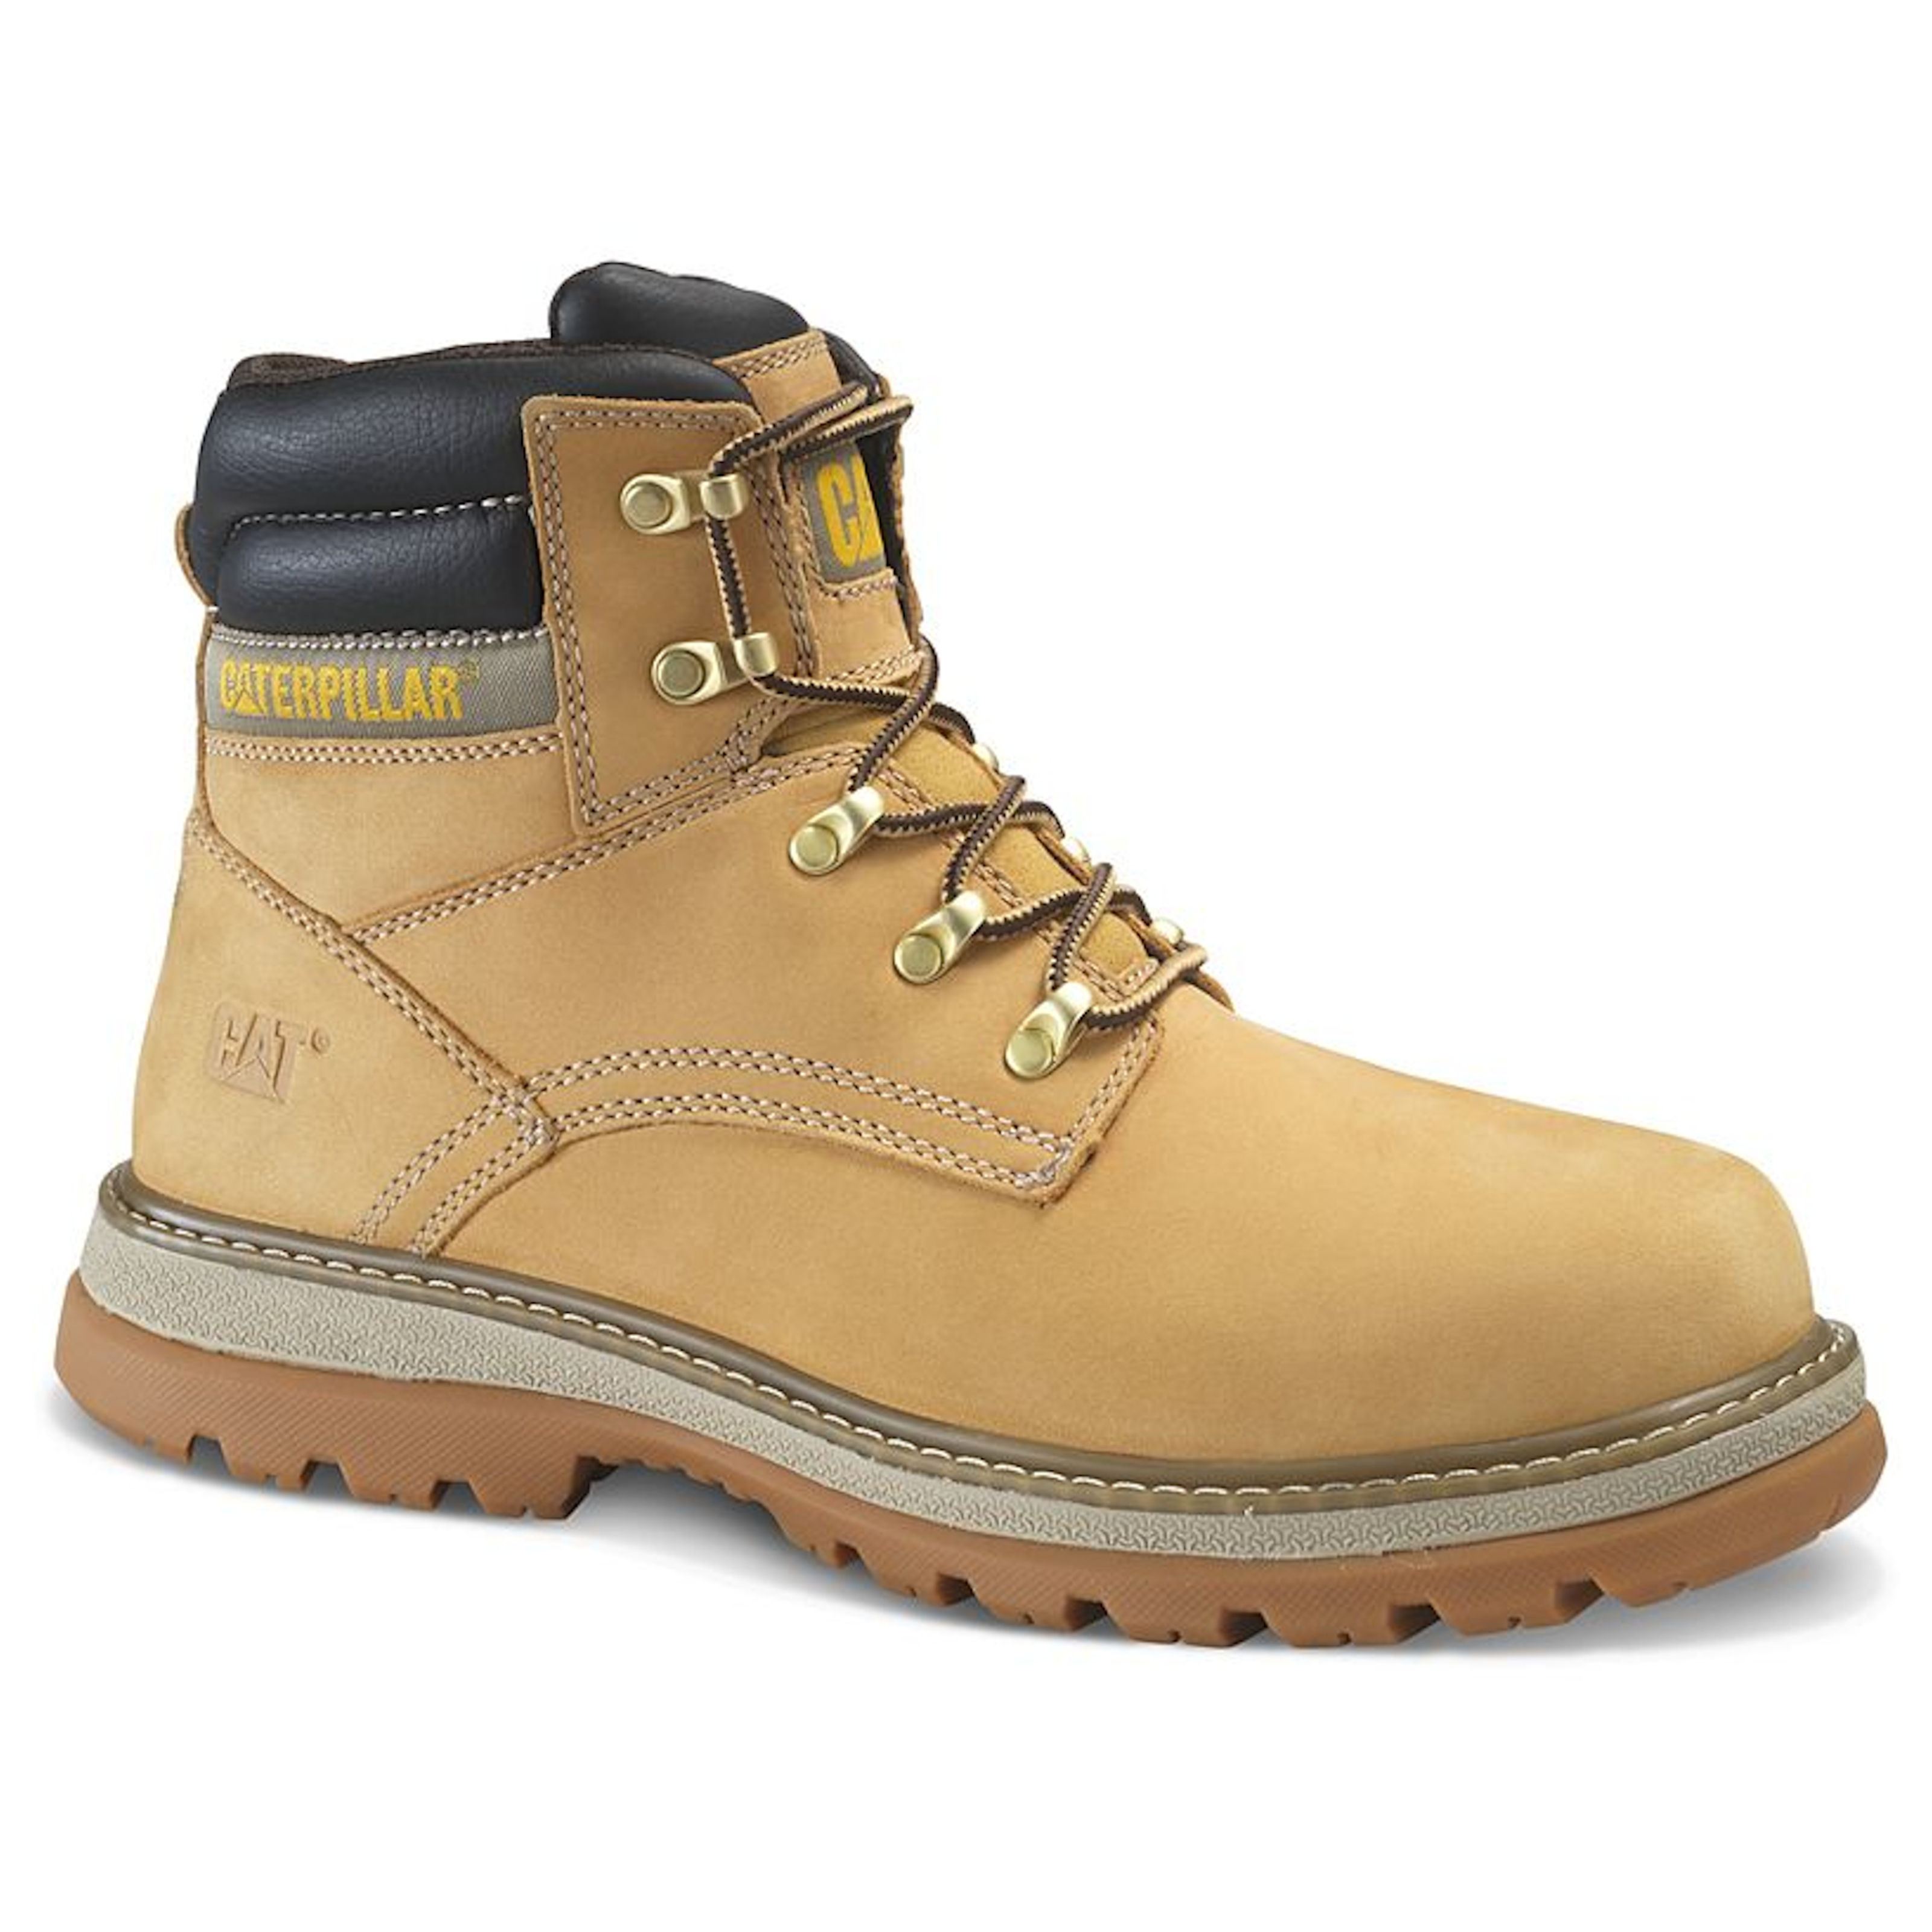 CAT Fairbanks Safety Boots